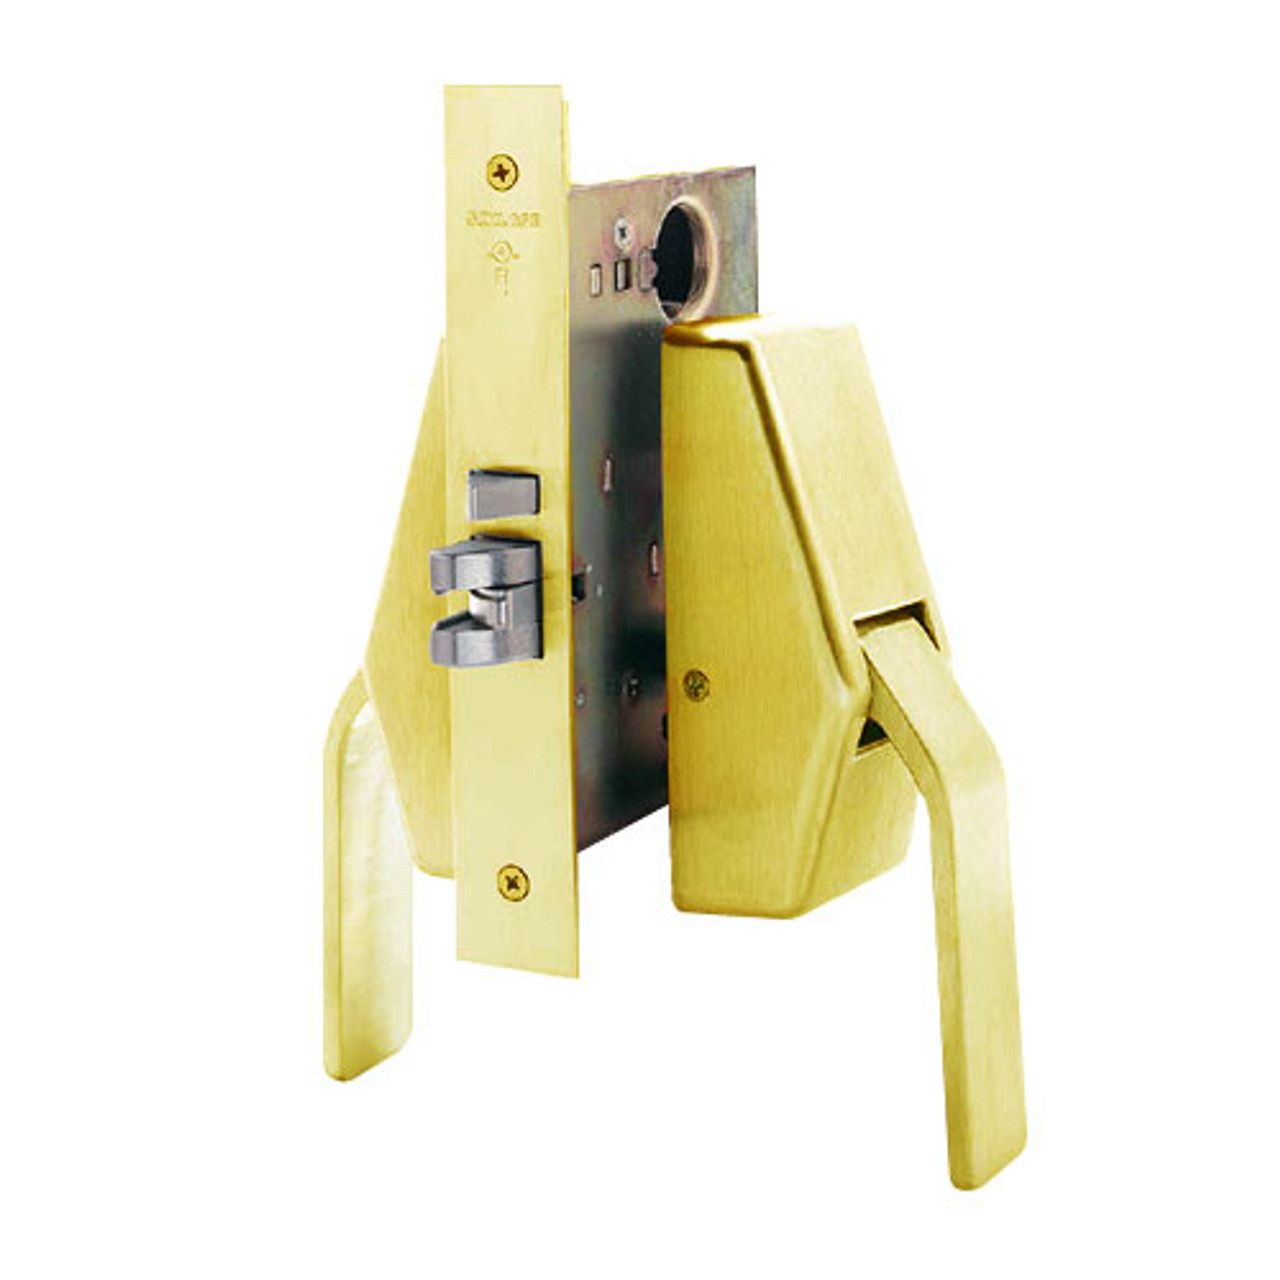 HL6-9486-605 Glynn Johnson HL6 Series Hotel Lock Thumbturn Function Push and Pull latch with Mortise Lock in Bright Brass Finish